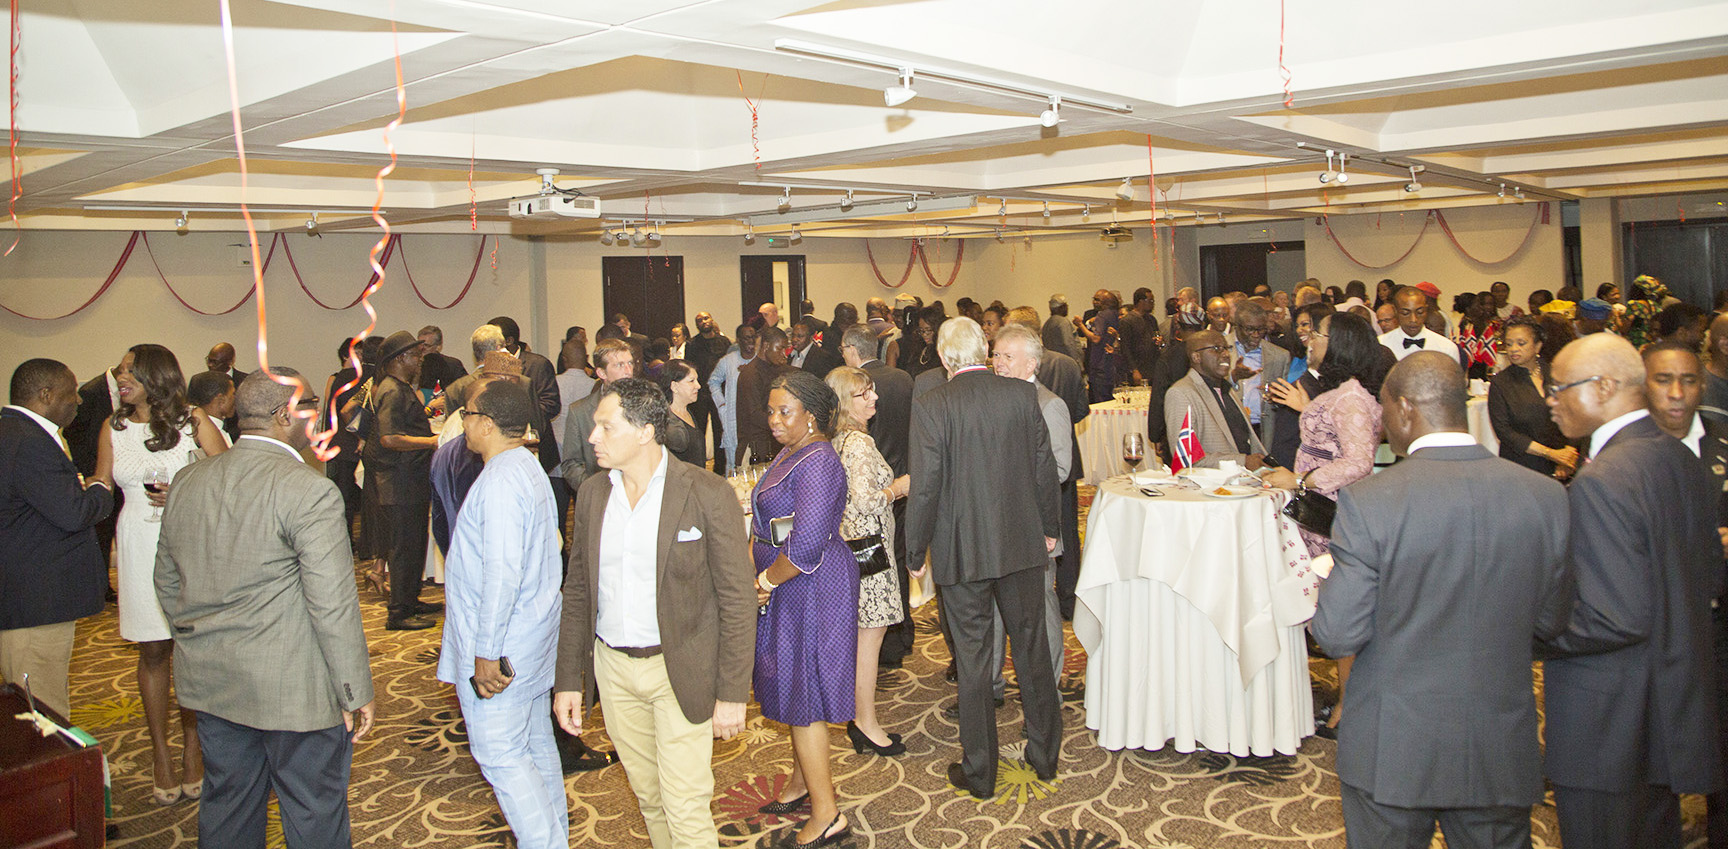 Cross section of guests at the inaugural reception. The inauguration was performed in Lagos on Saturday 14th May, 2016 by His Excellency, the Ambassador of Norway to Nigeria, Rolf Kristian REE as part of the ceremonies marking the National Day of Norway on 17th May, 2016.